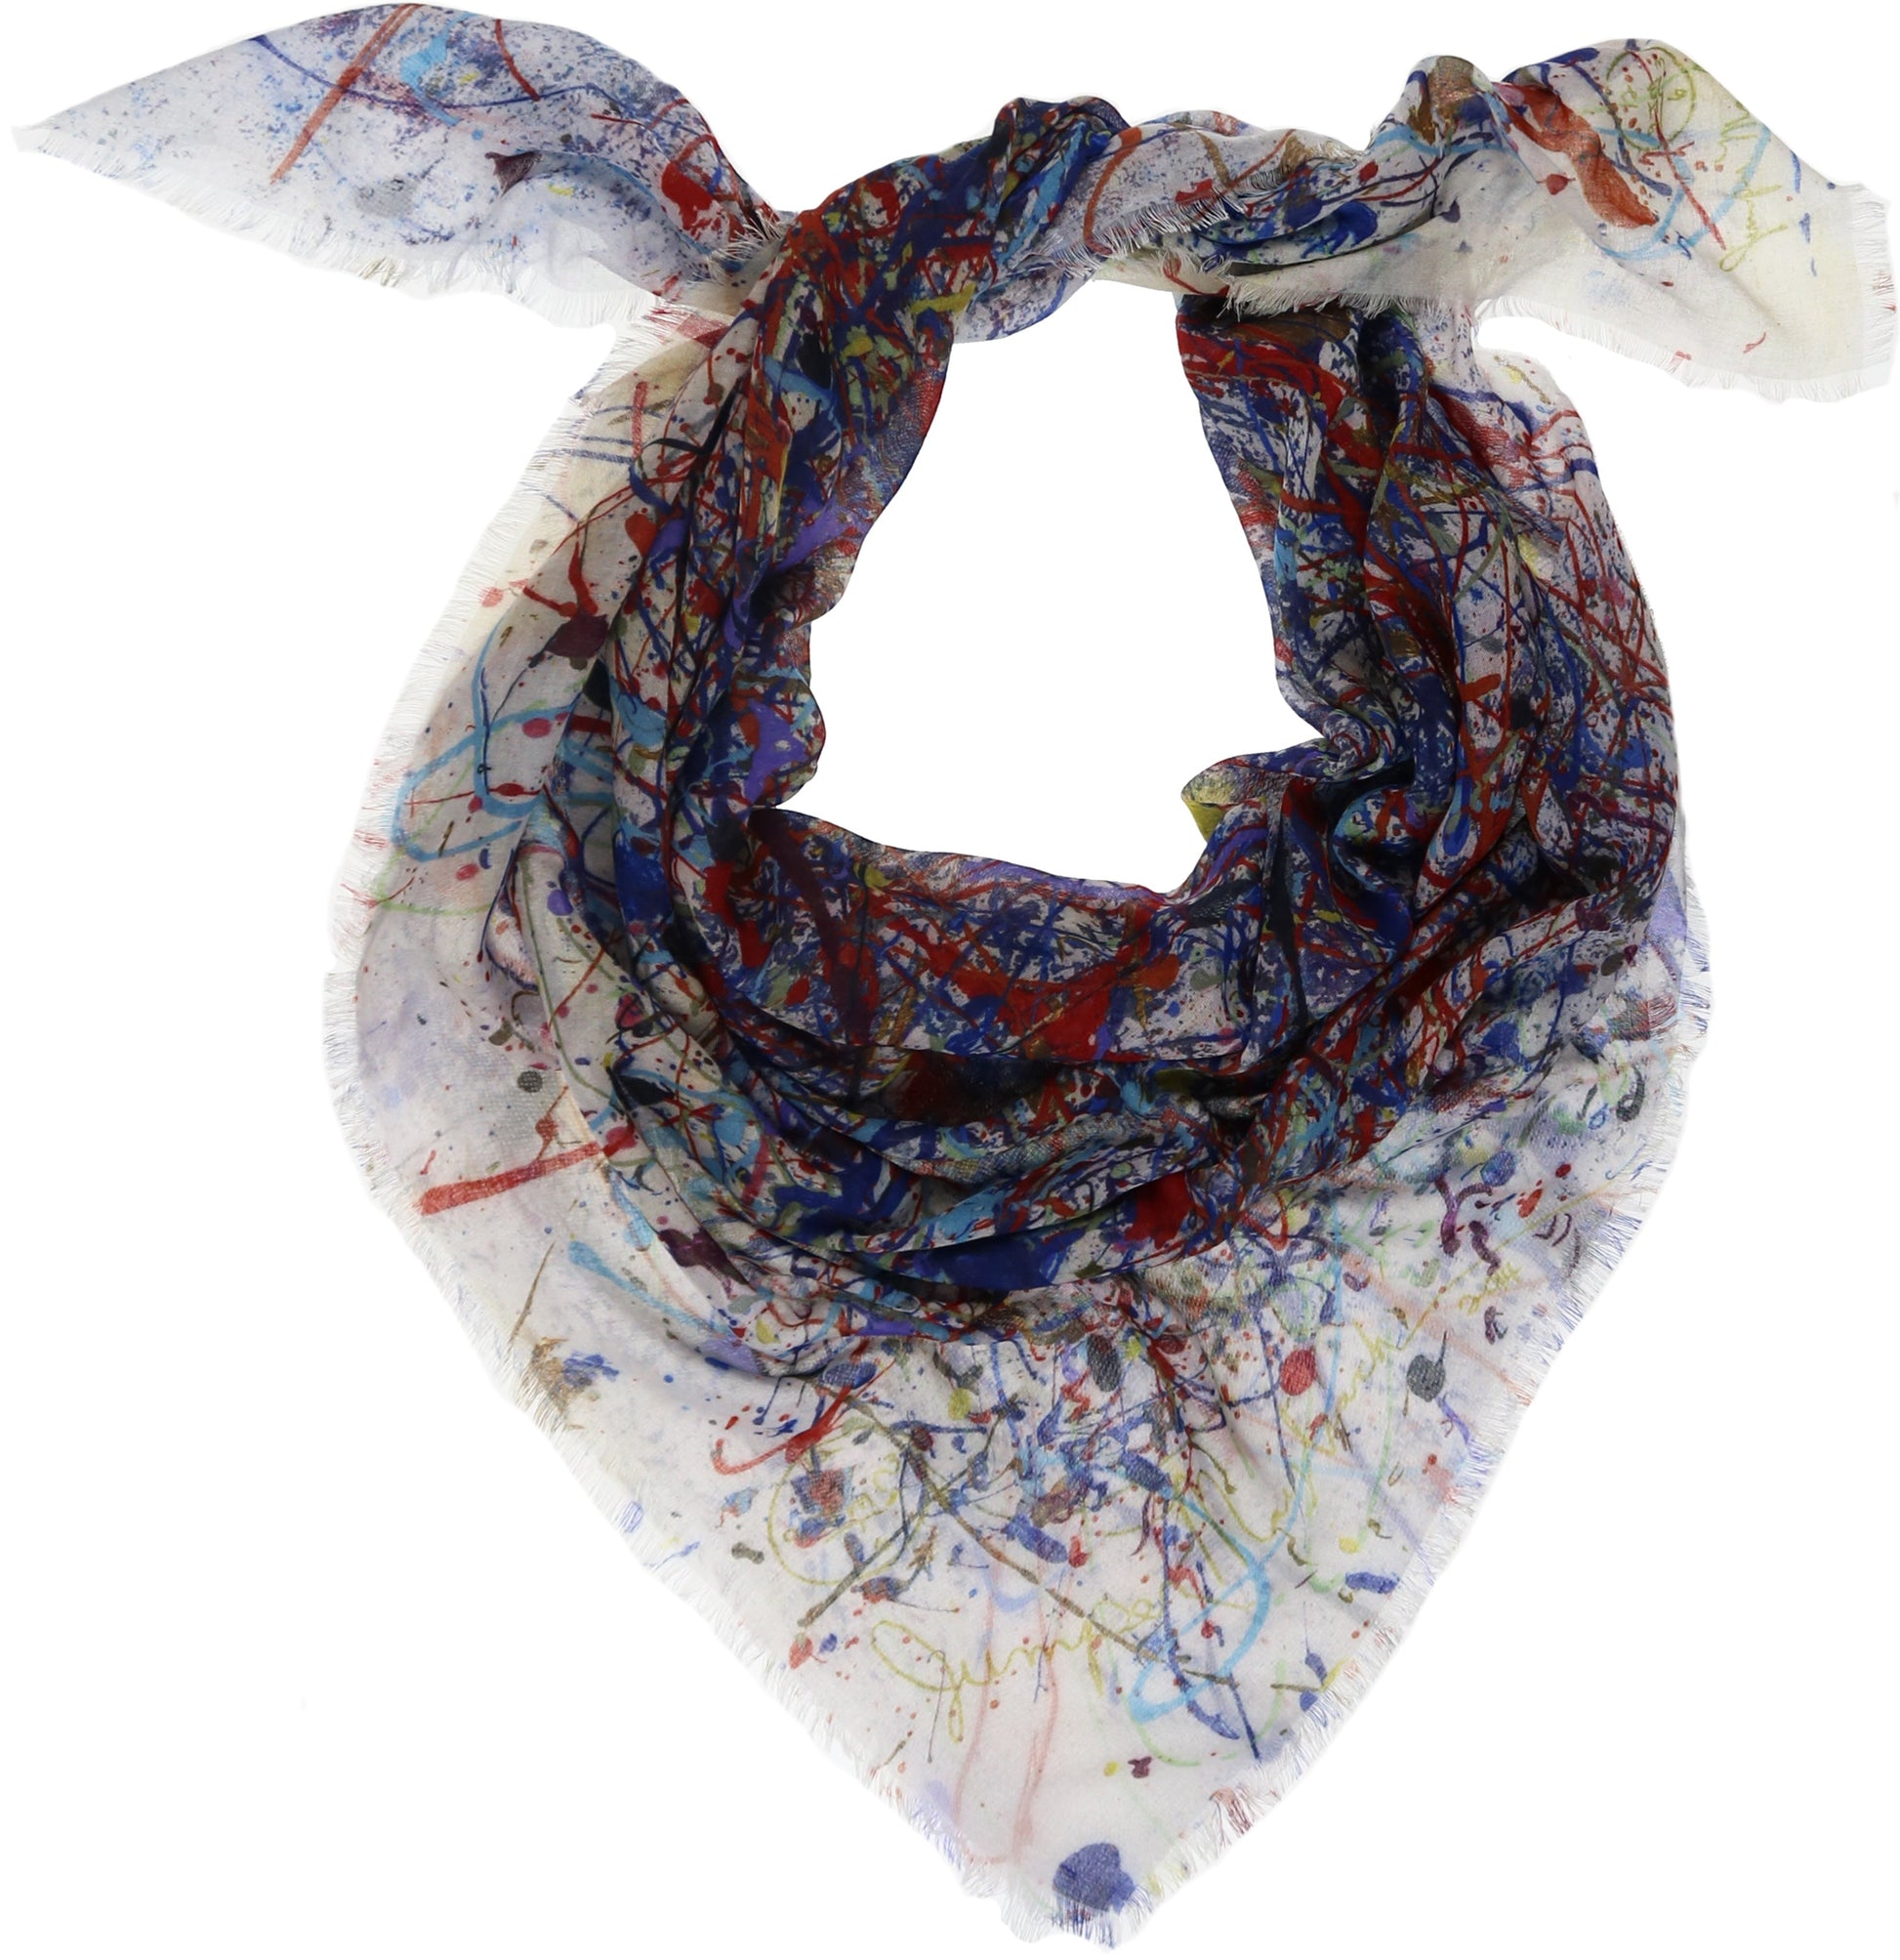 Jumper Maybach X FRAAS "Venice Glory" Recycled Polyester Square Scarf 2